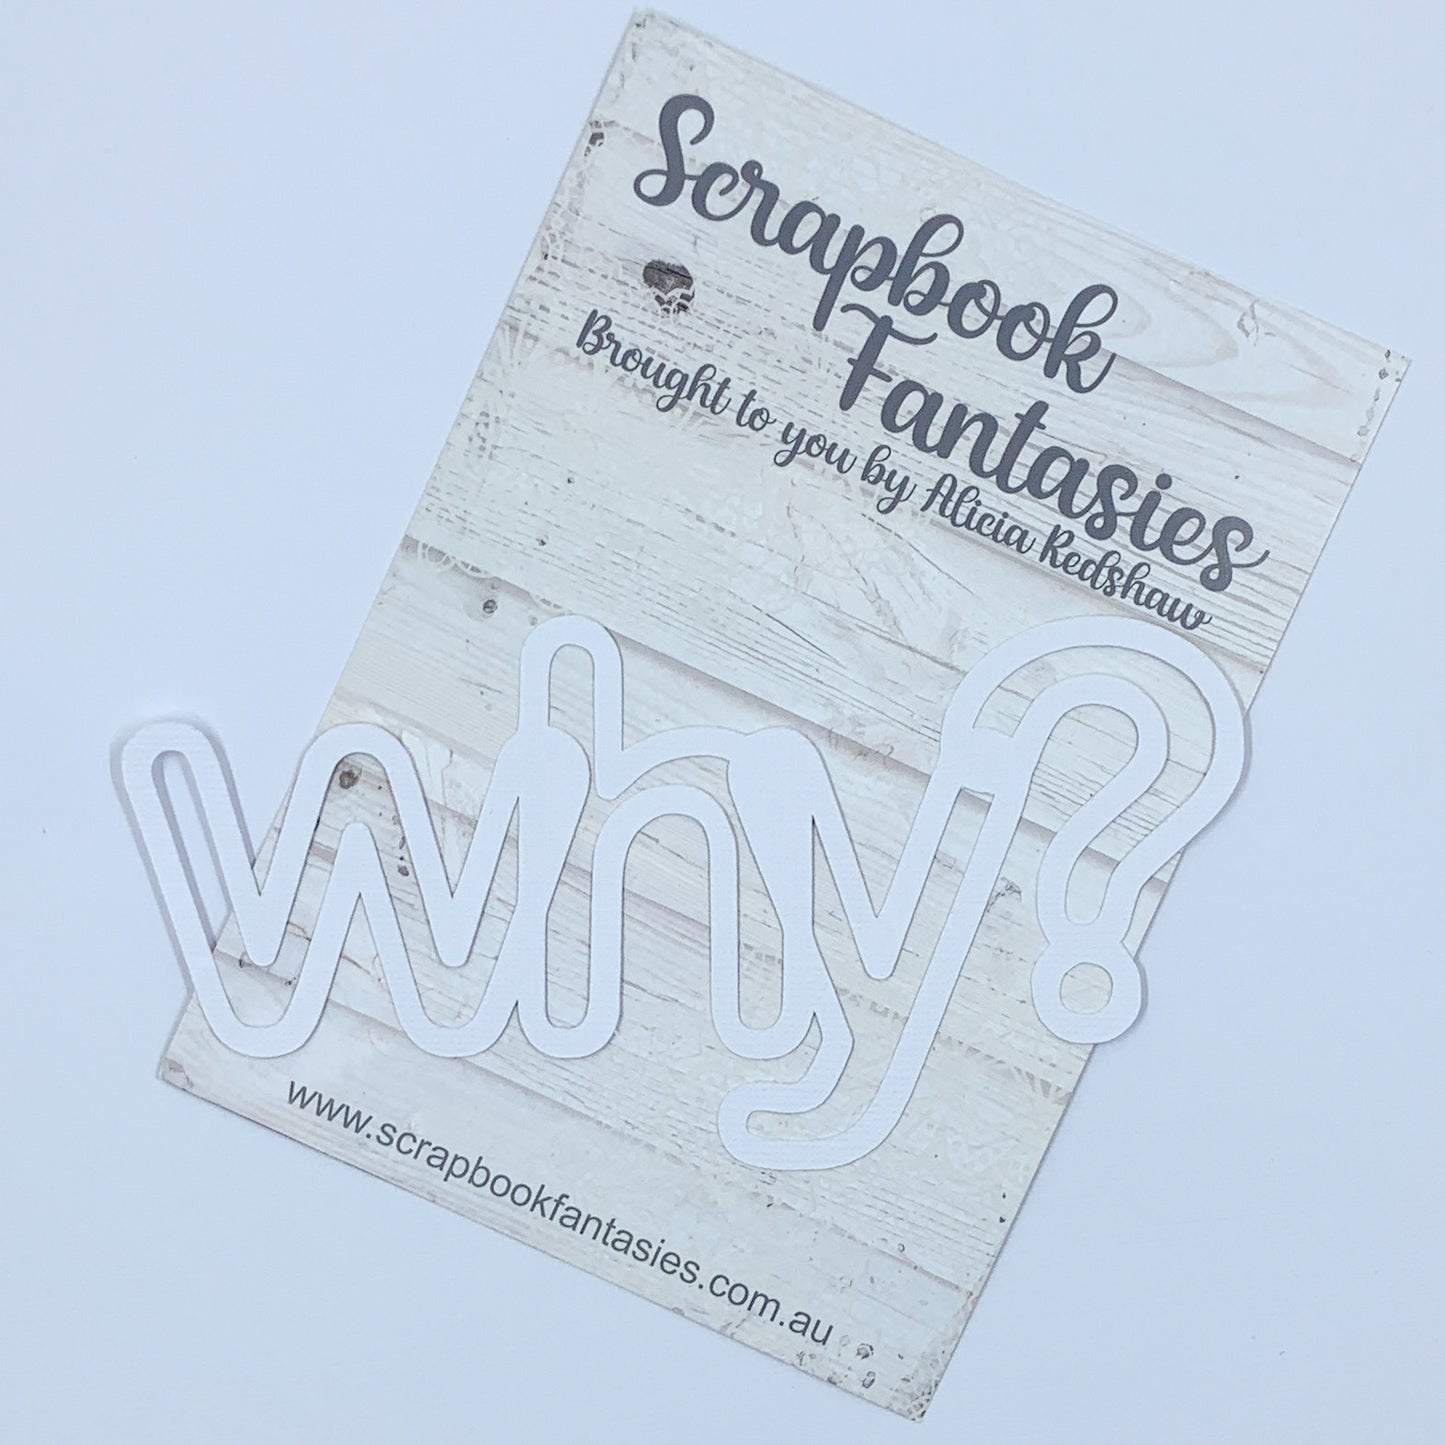 Robot Antics - Why? 6"x3.25" White Linen Cardstock Title-Cut  - Designed by Alicia Redshaw